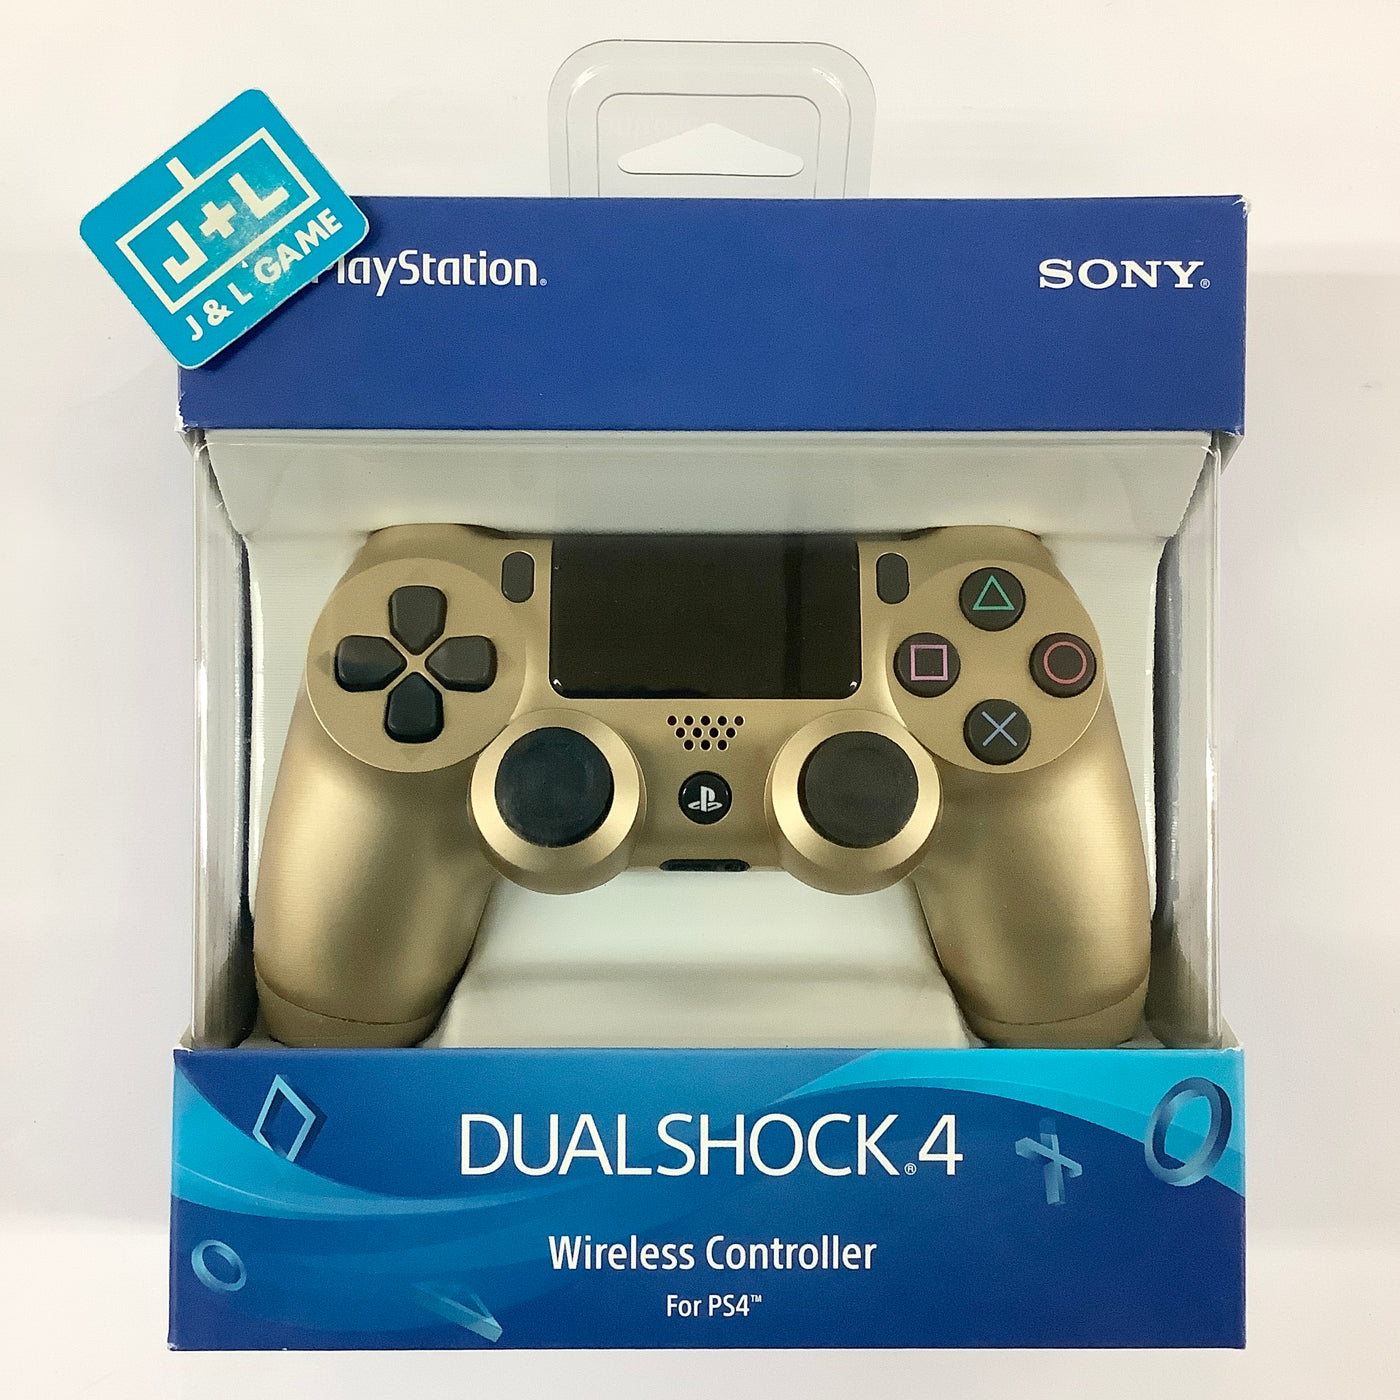 Sony DualShock 4 Wireless Controller (Gold) - (PS4) PlayStation 4